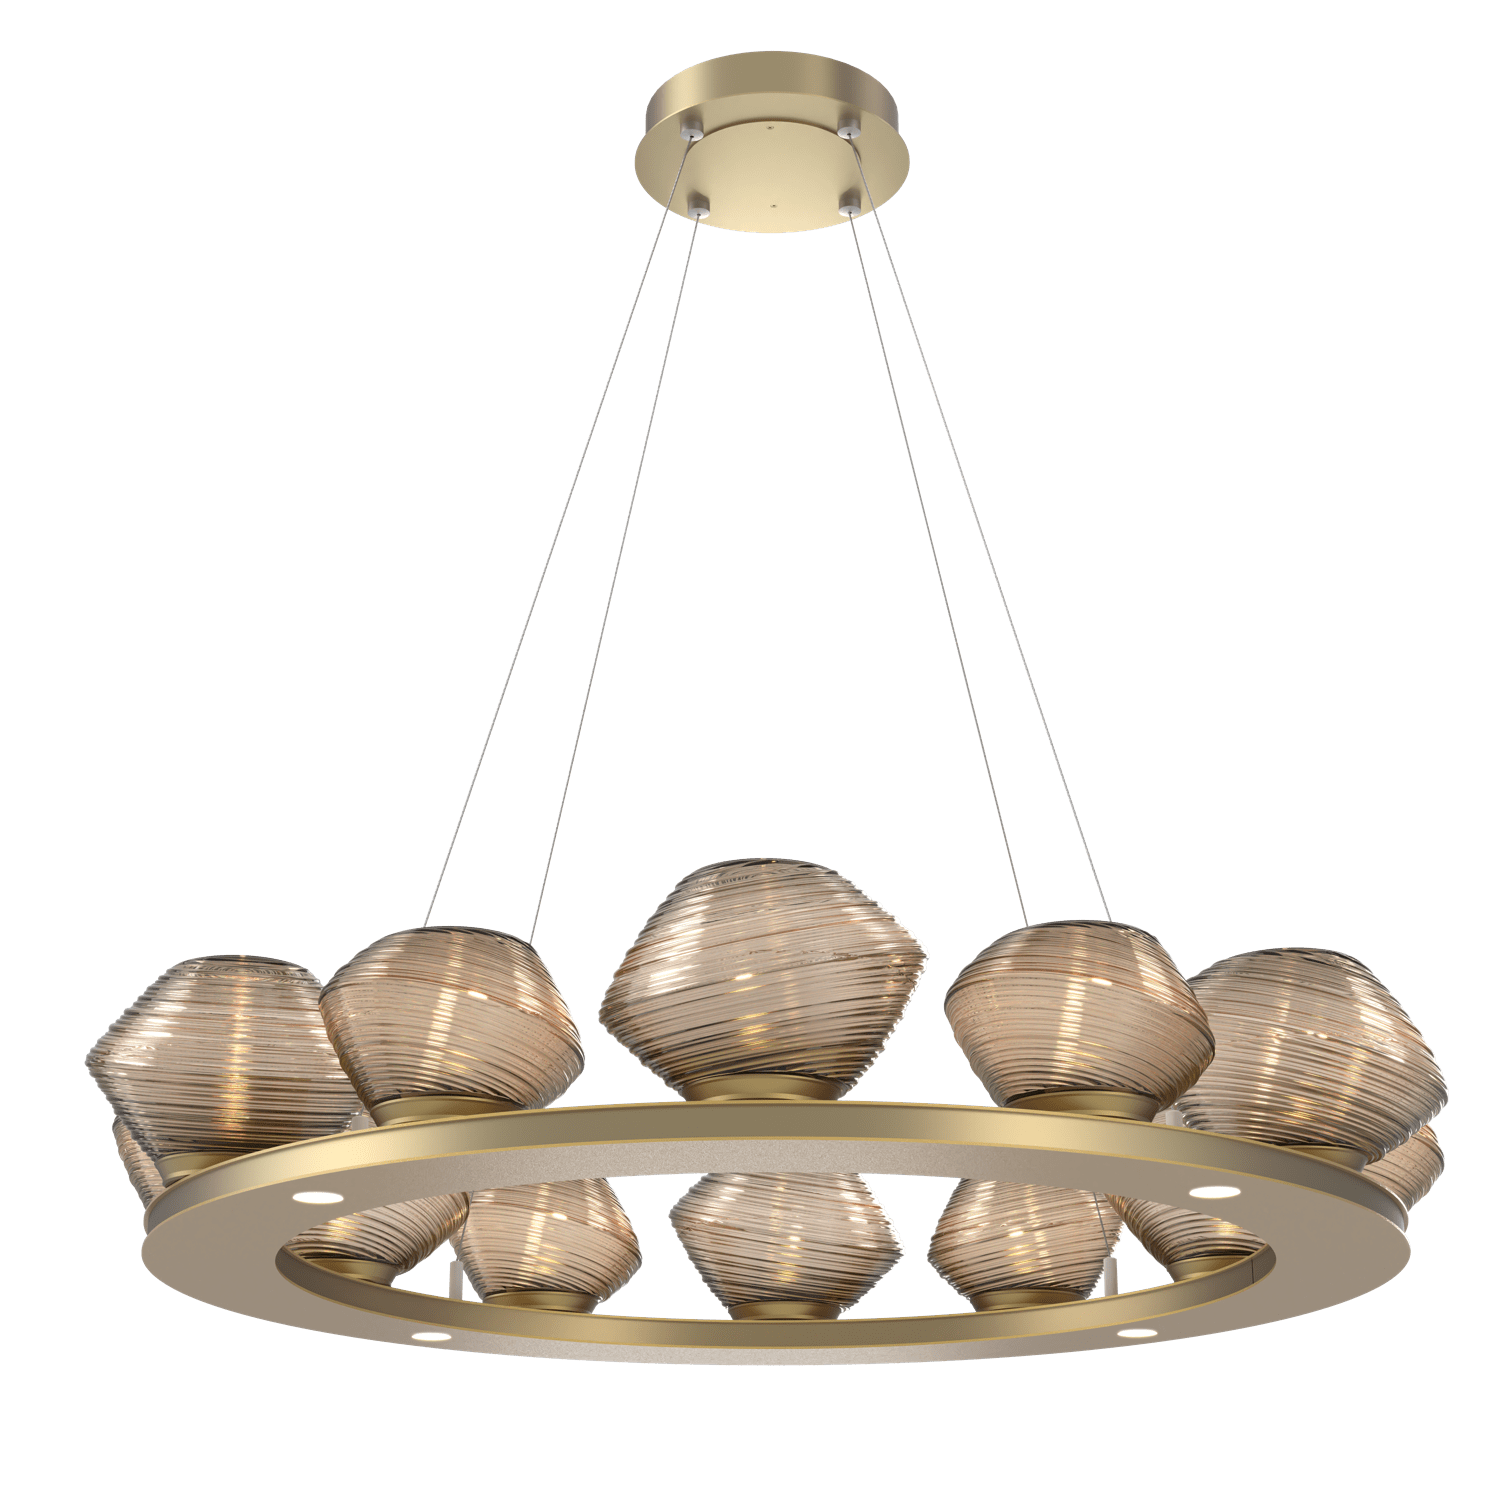 CHB0089-0C-GB-B-Hammerton-Studio-Mesa-36-inch-ring-chandelier-with-gilded-brass-finish-and-bronze-blown-glass-shades-and-LED-lamping